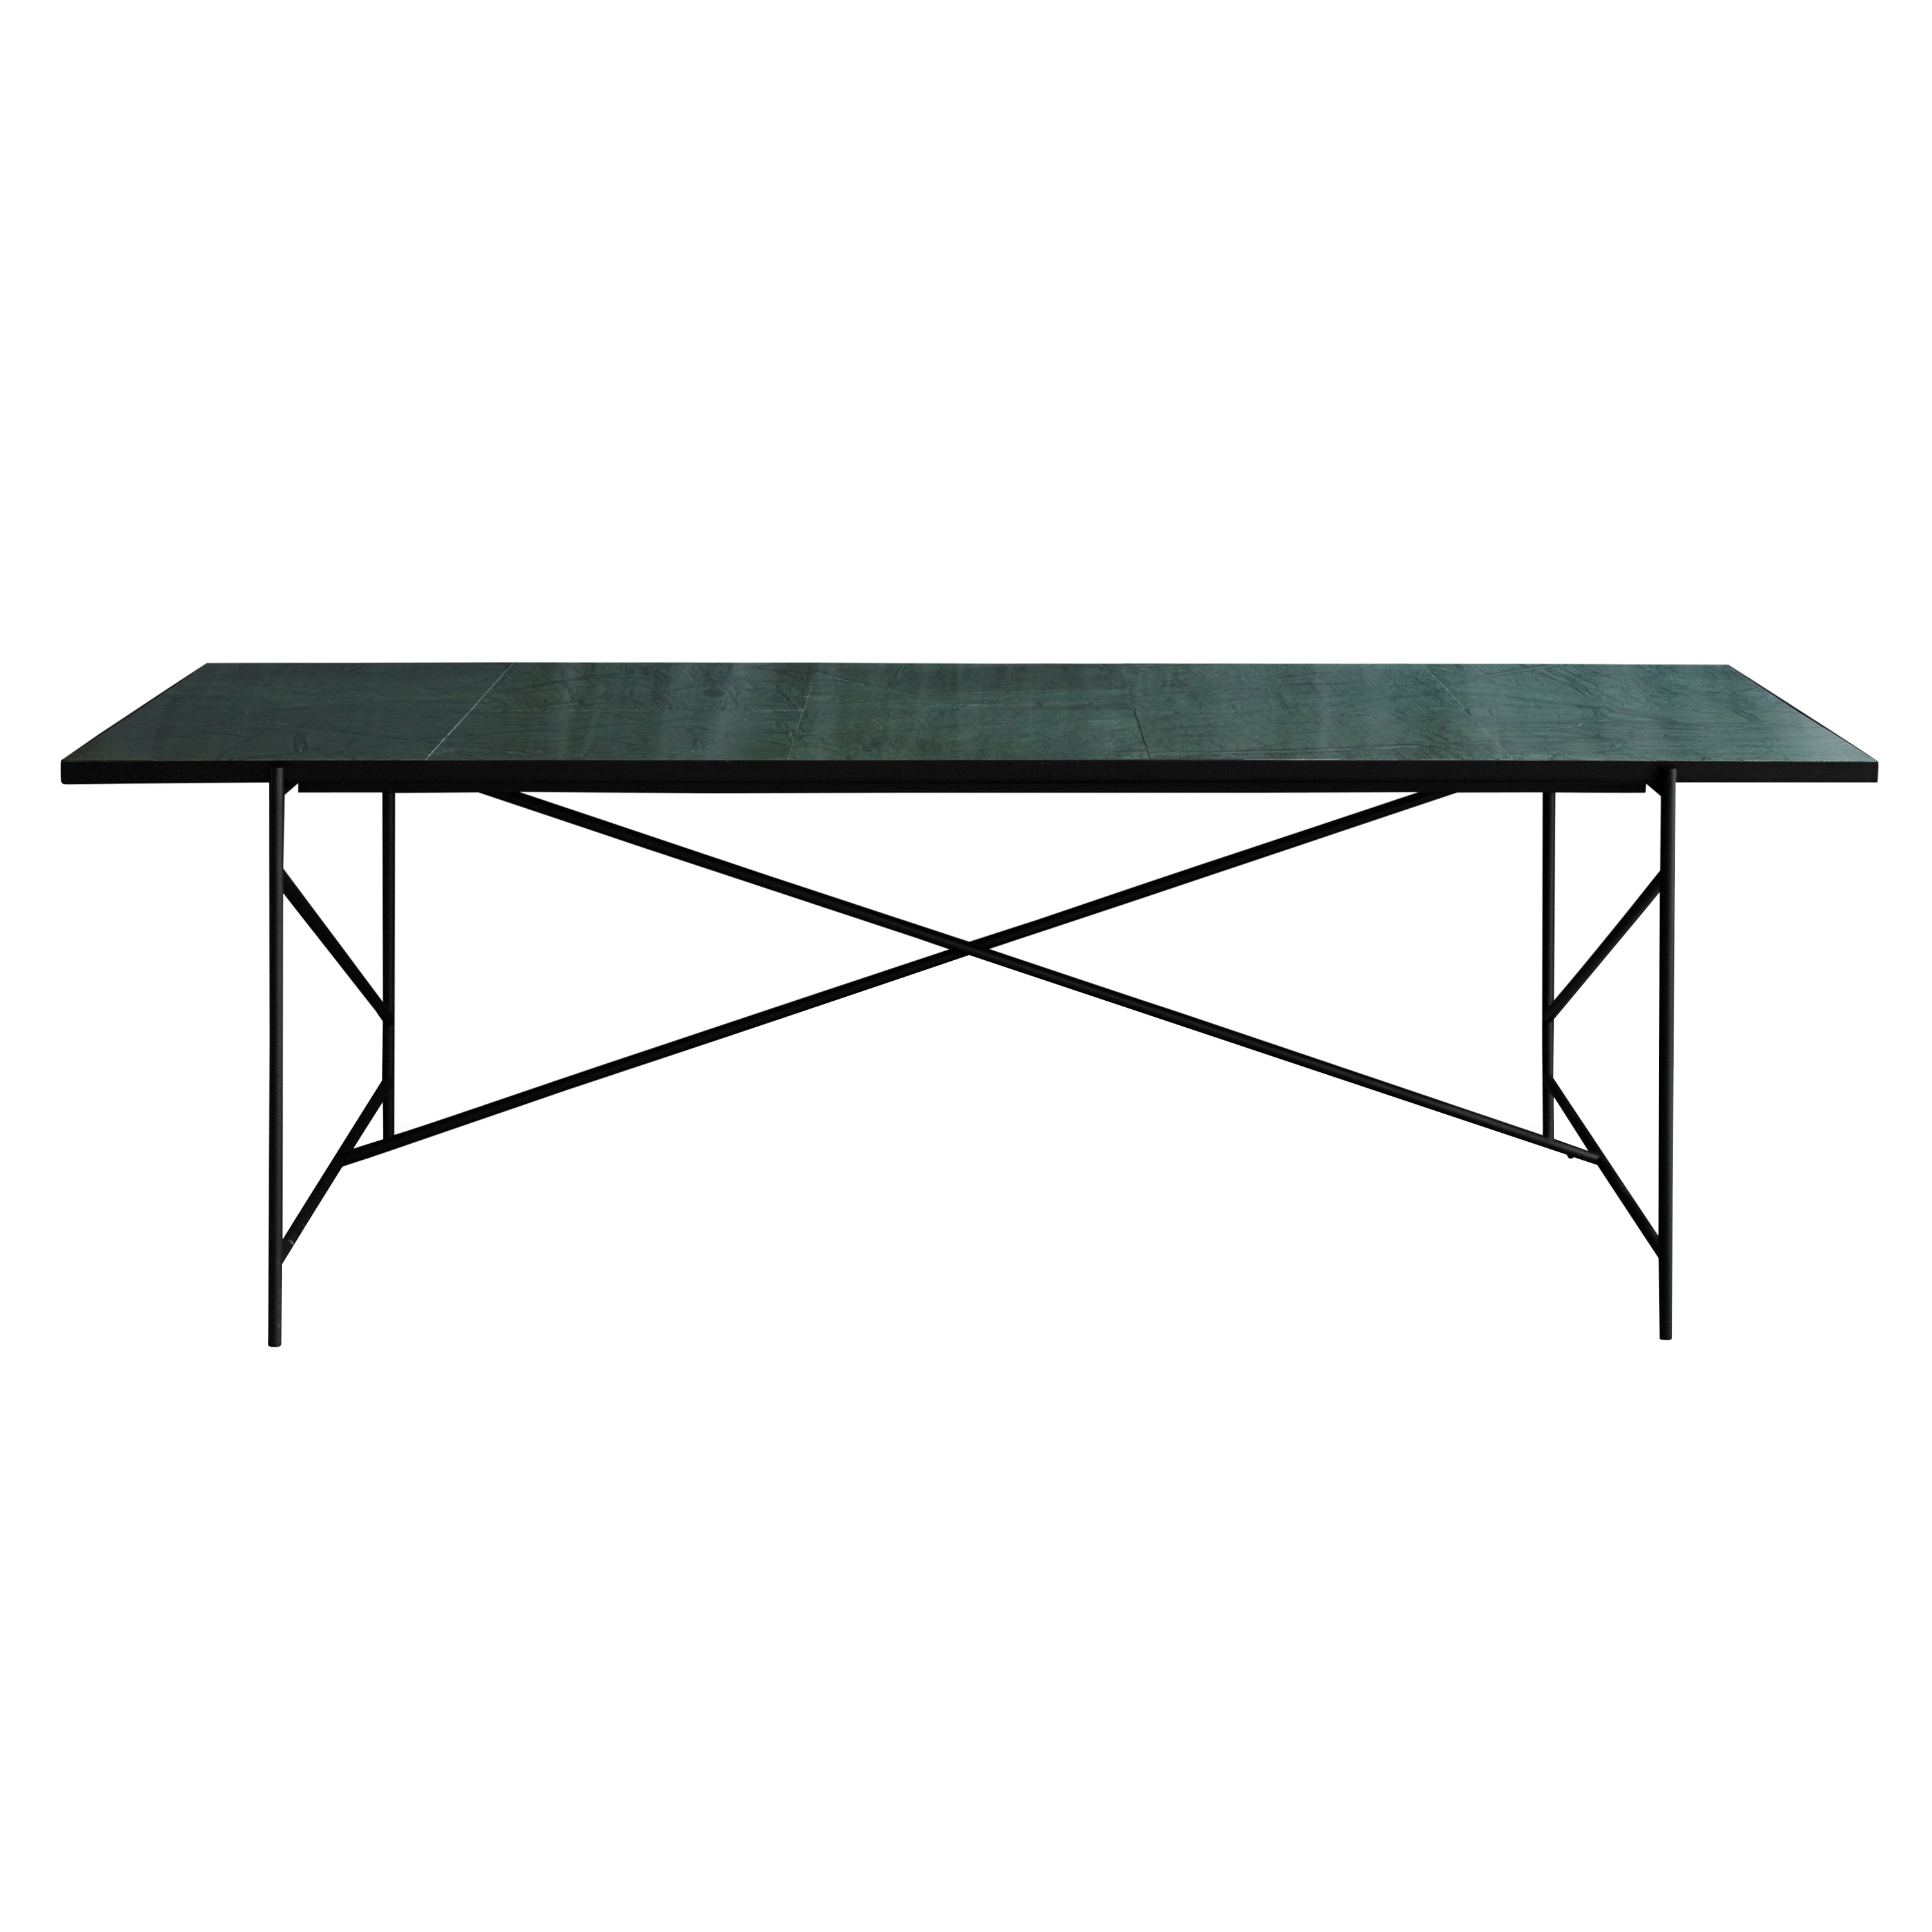 Dining Table 230: Black + Green Marble